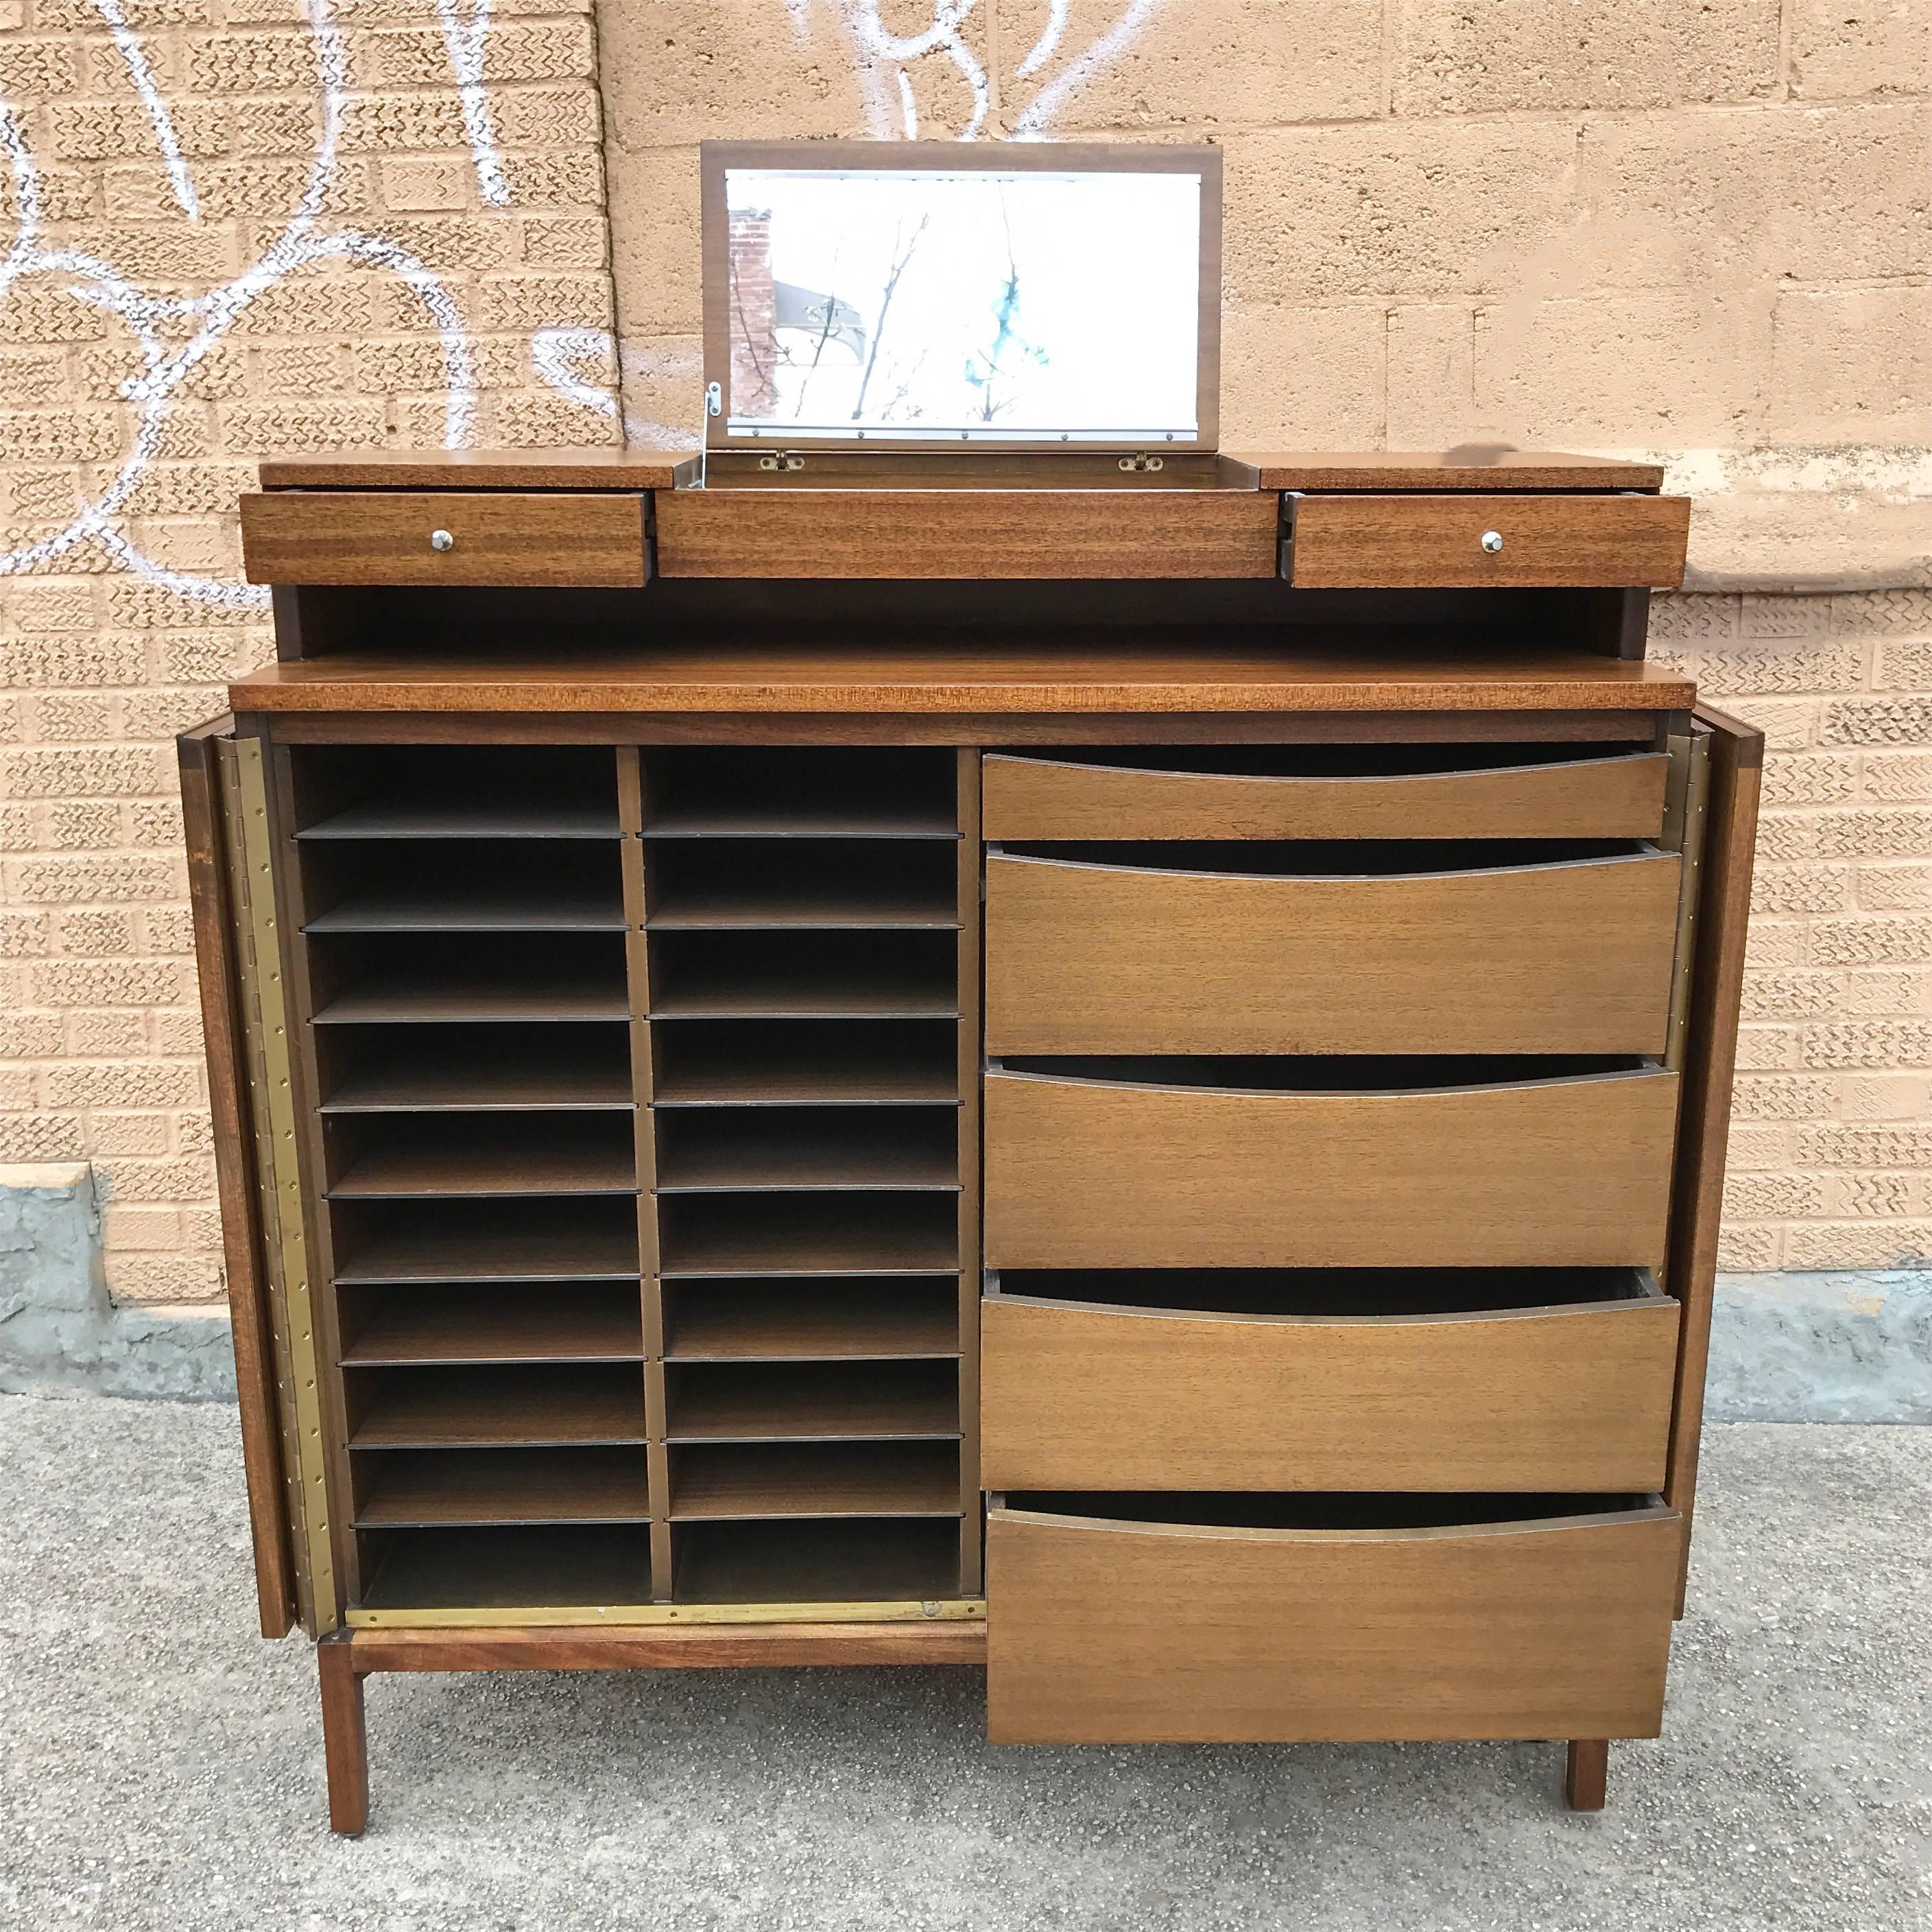 20th Century Tall Gentleman's Chest Dresser by Paul McCobb for Calvin the Irwin Collection